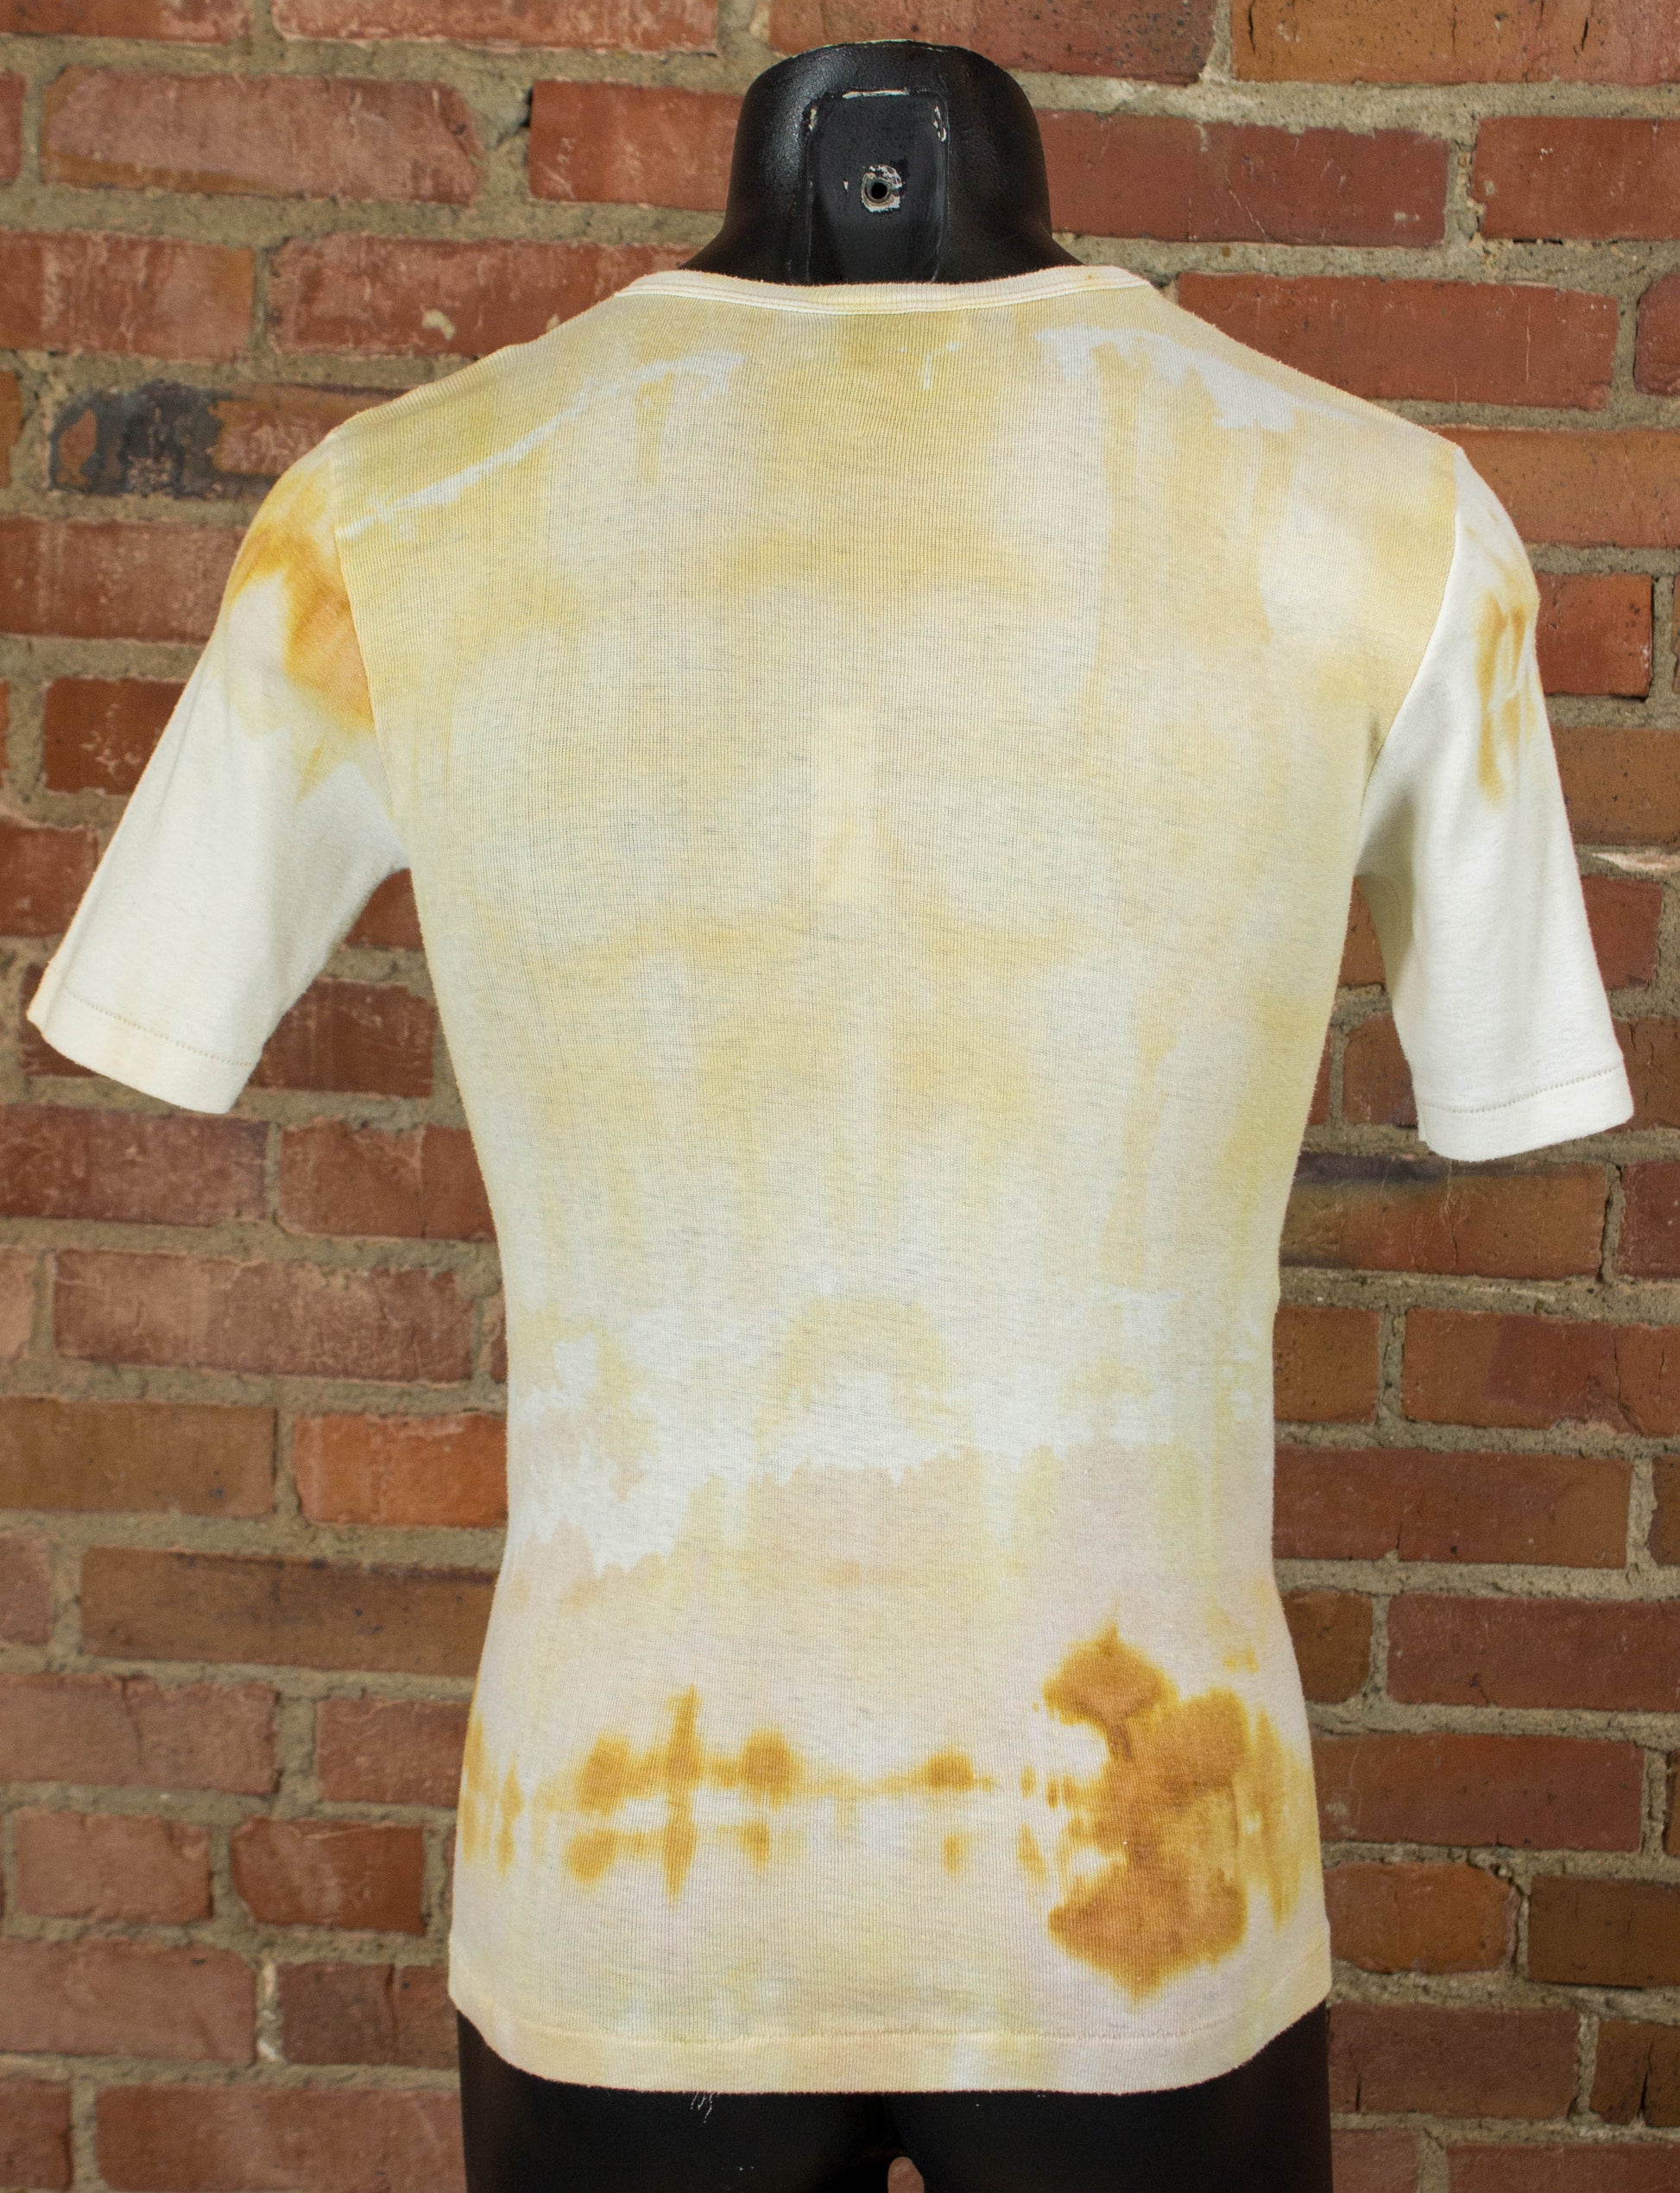 Vintage 70s Wrangler Wrapid Transit Tan and White Tie Dye Ribbed Peacock Graphic T Shirt Unisex XS-Small